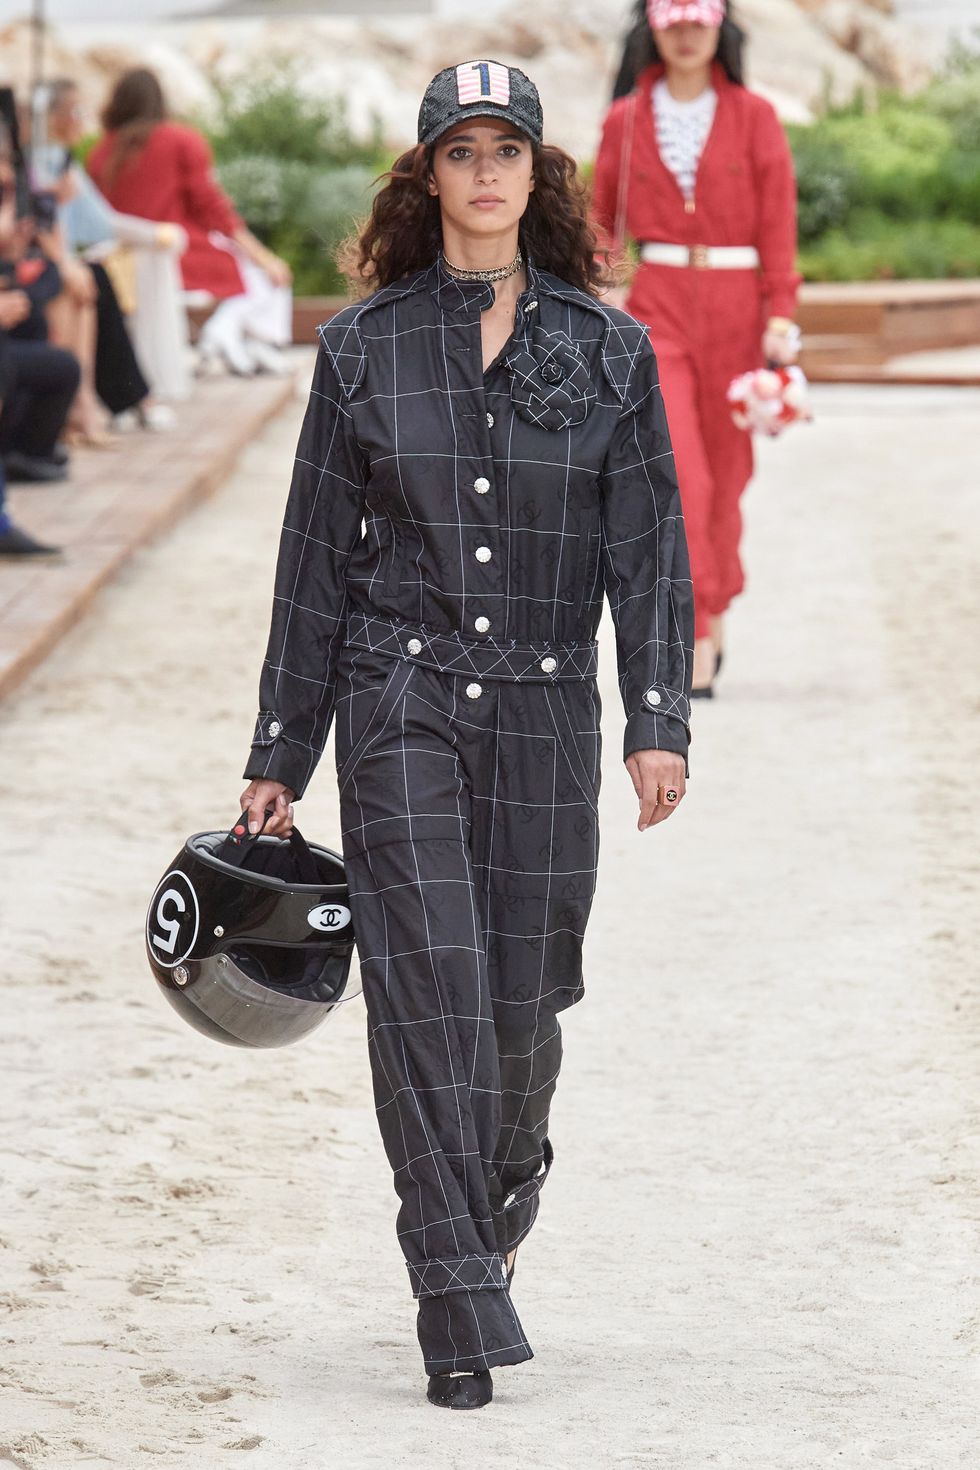 Chanel Bag on the Fall/Winter 2020 Runway